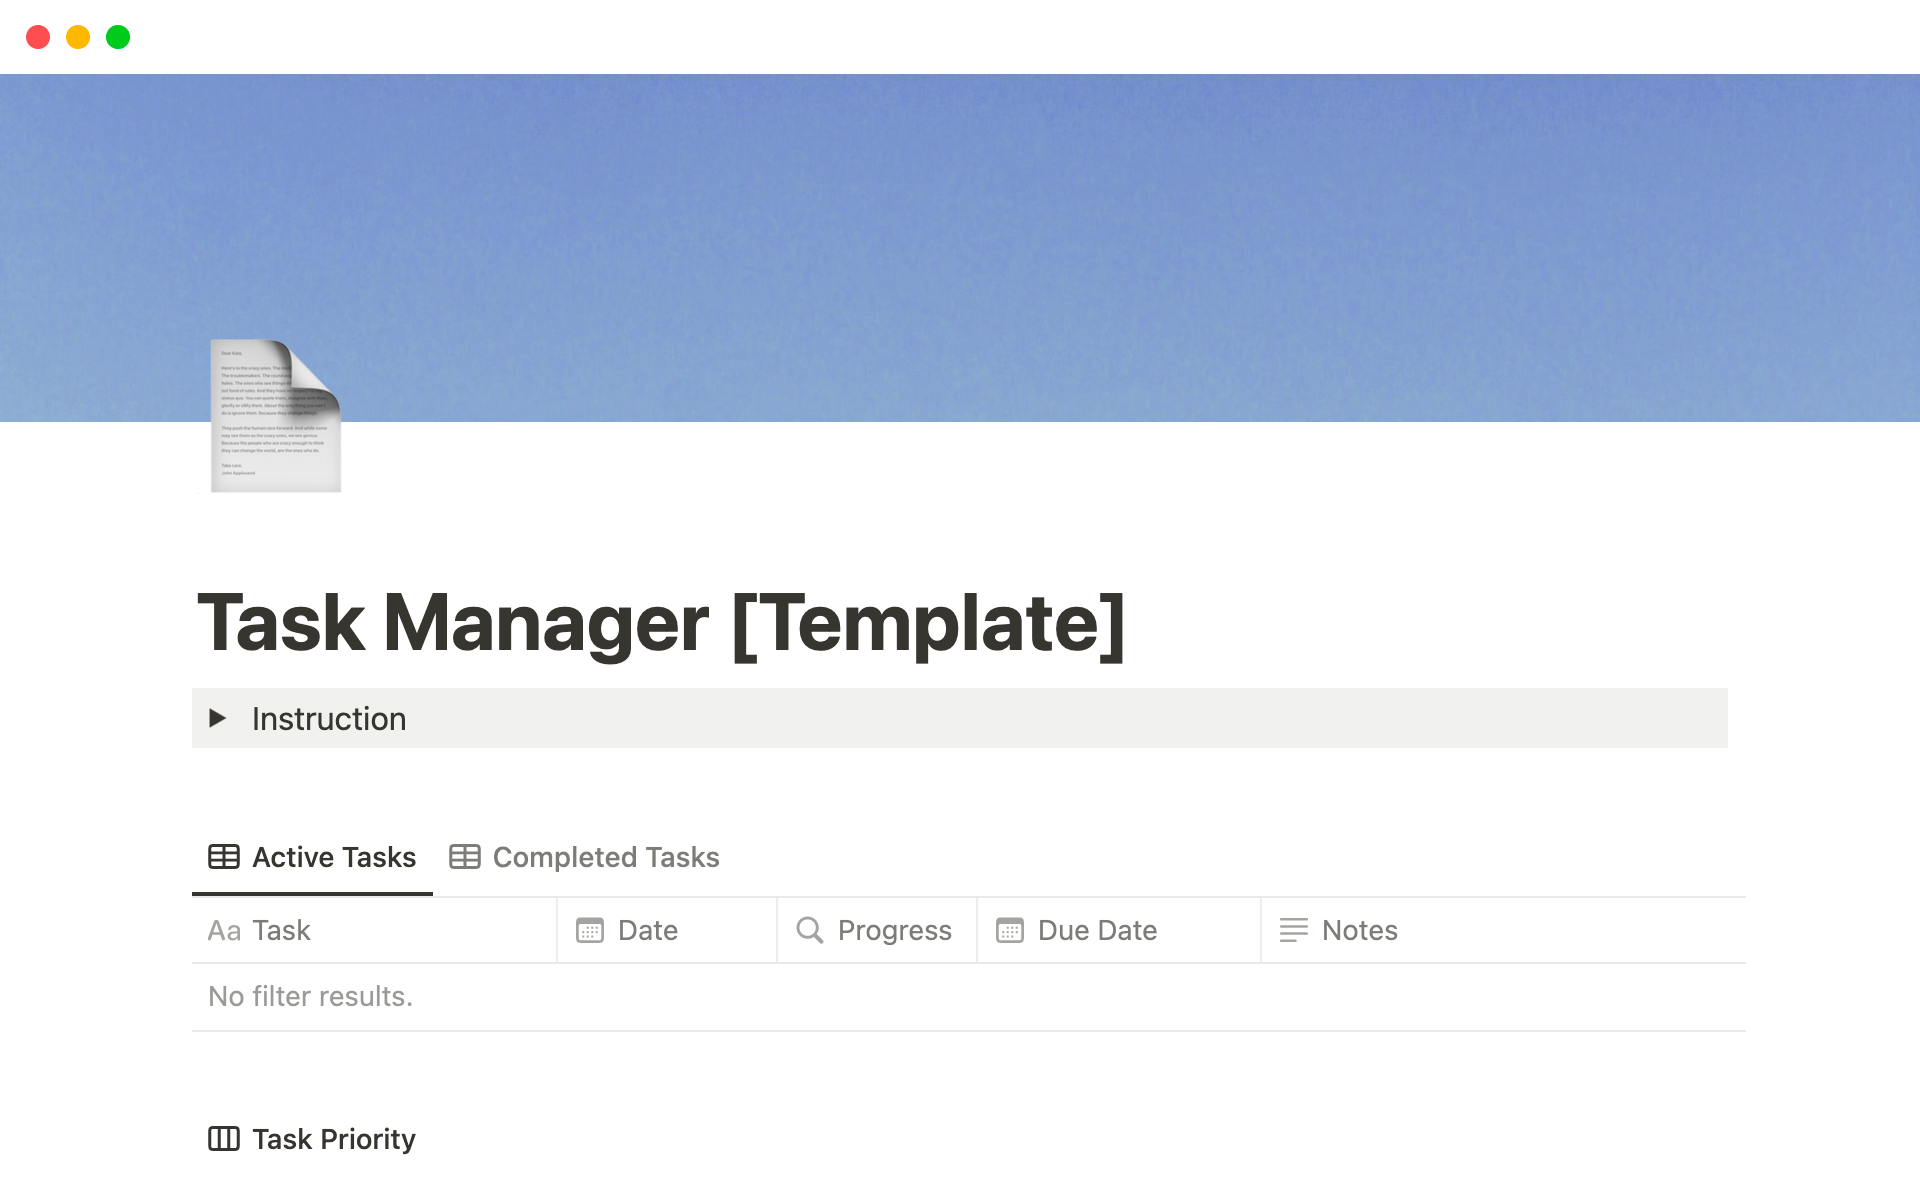 Stay organized and supercharge your productivity with this task manager template that offers task lists, task priority, a visual progress bar, and the capability to break down tasks into subtasks, making it simple to organize, manage, and track your tasks.